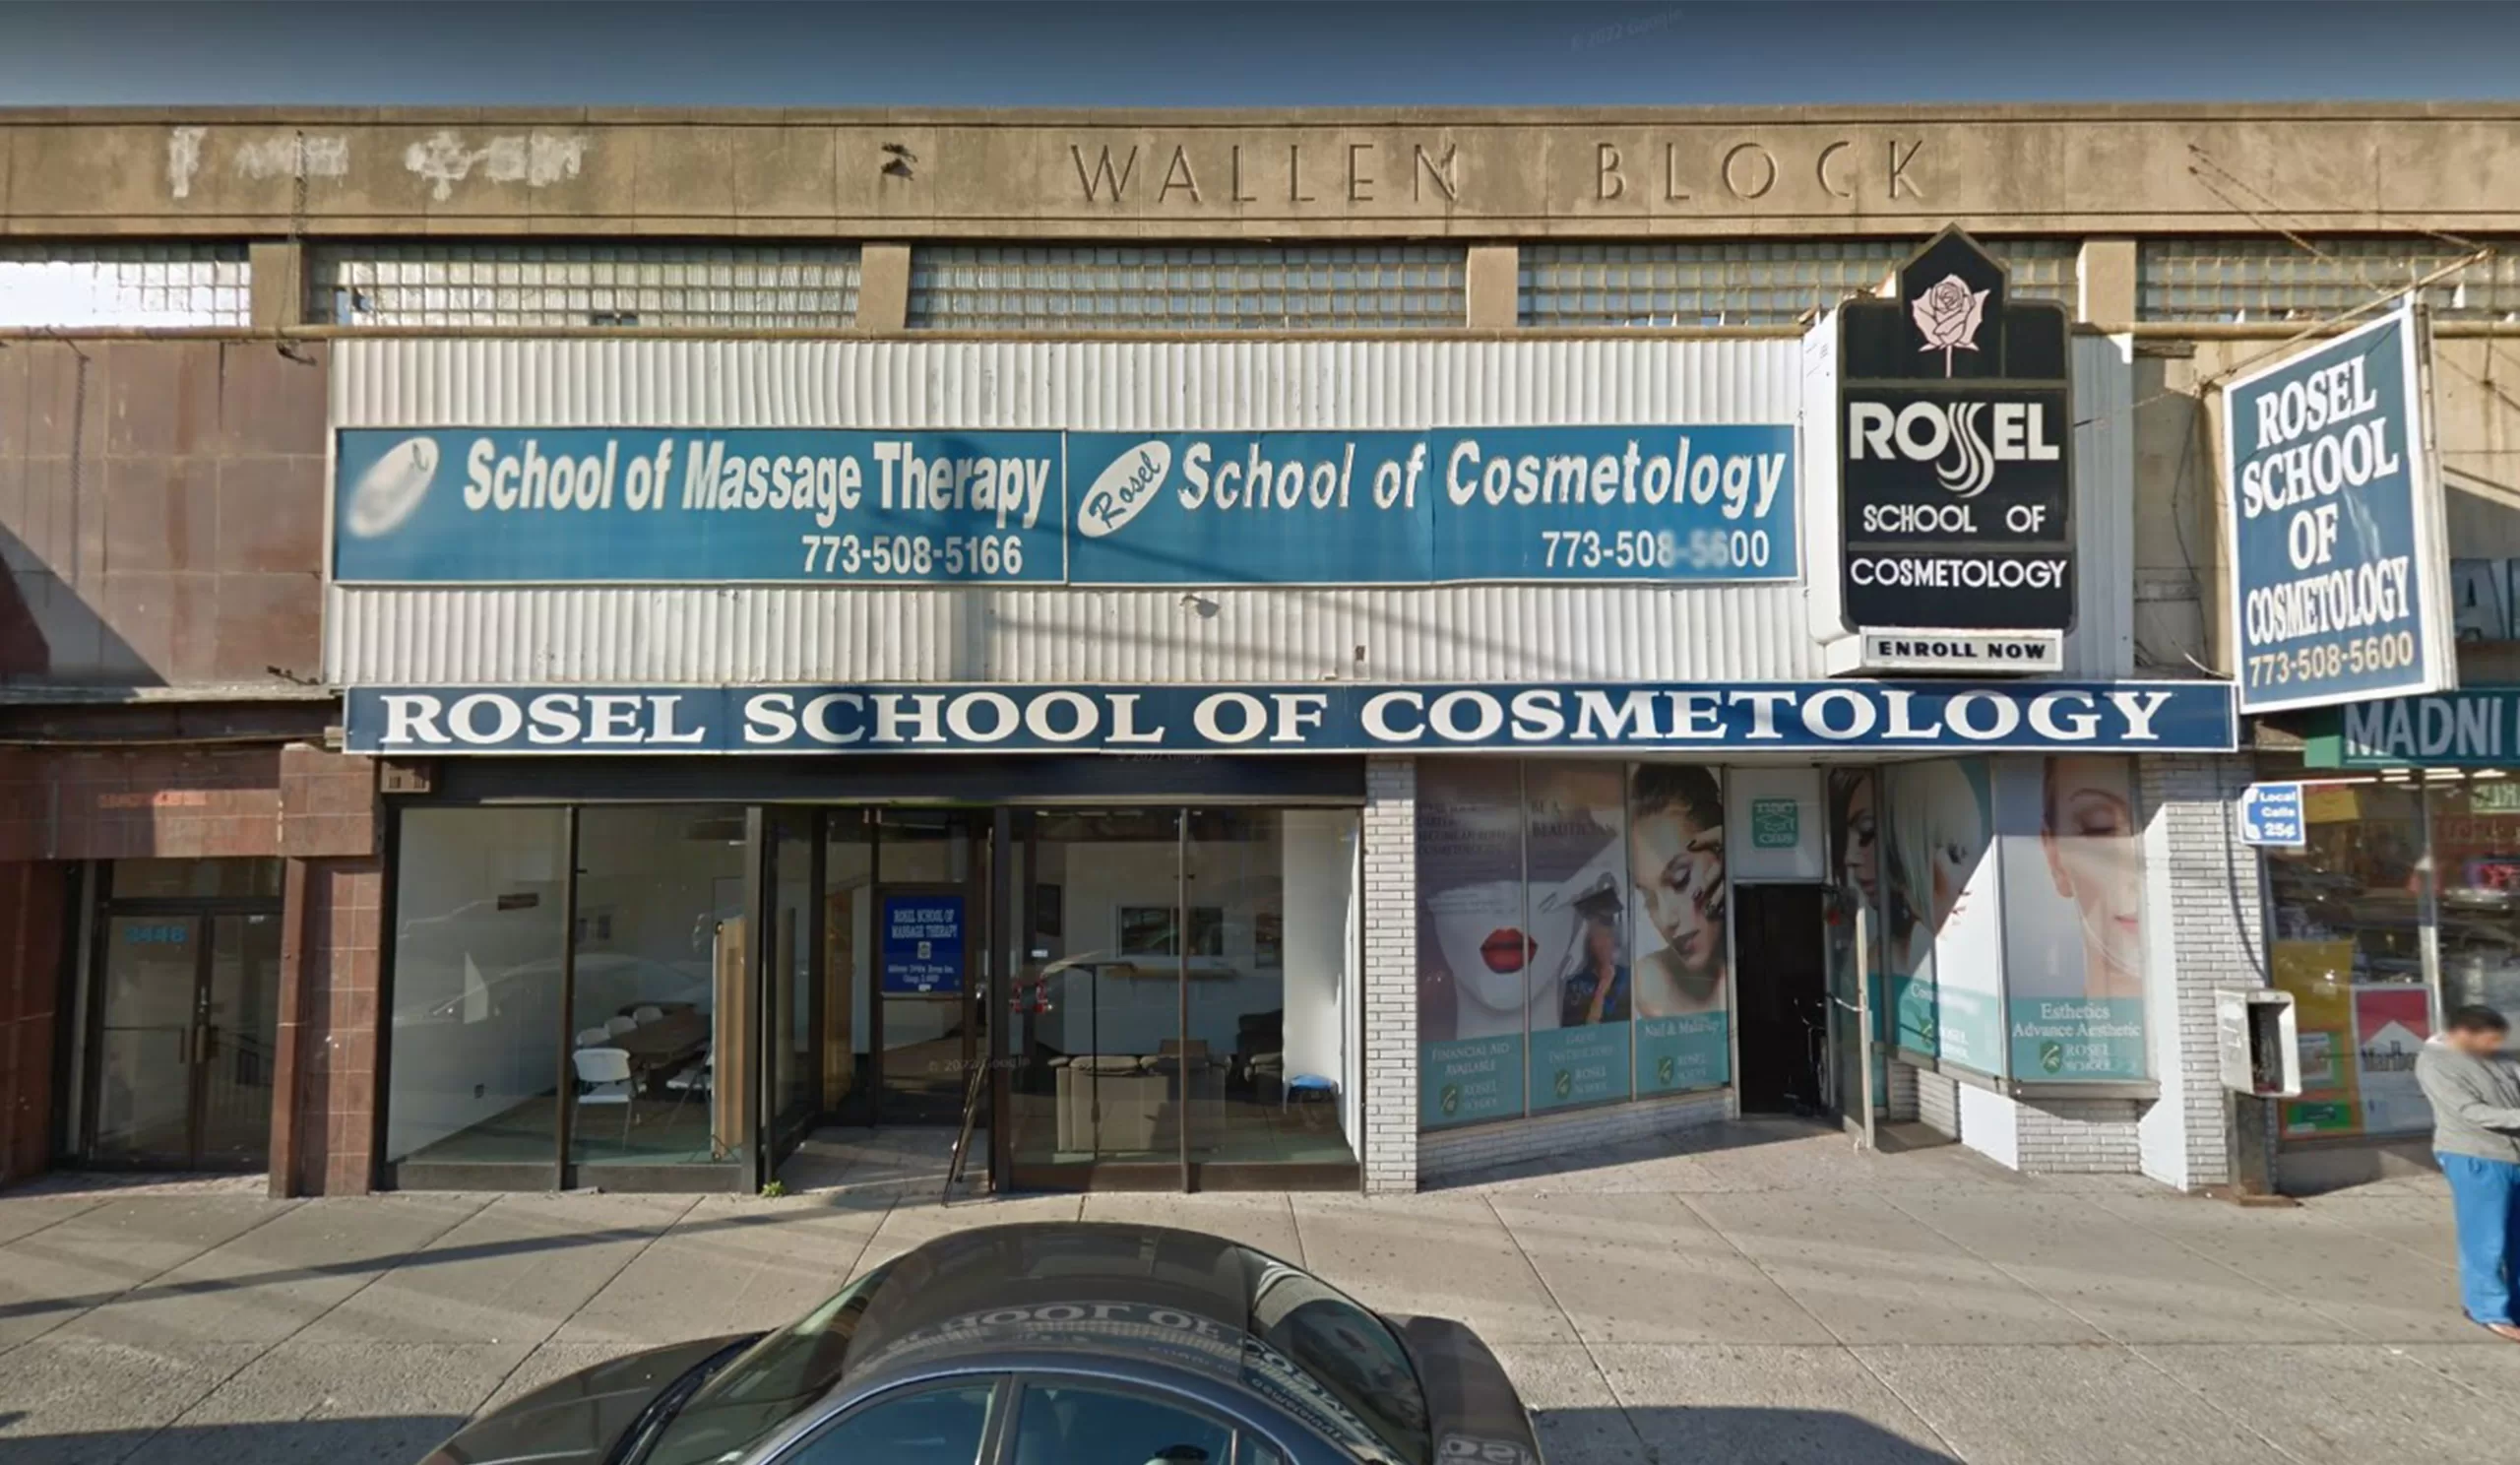 The old location of Rosel School of Cosmetology in Chicago